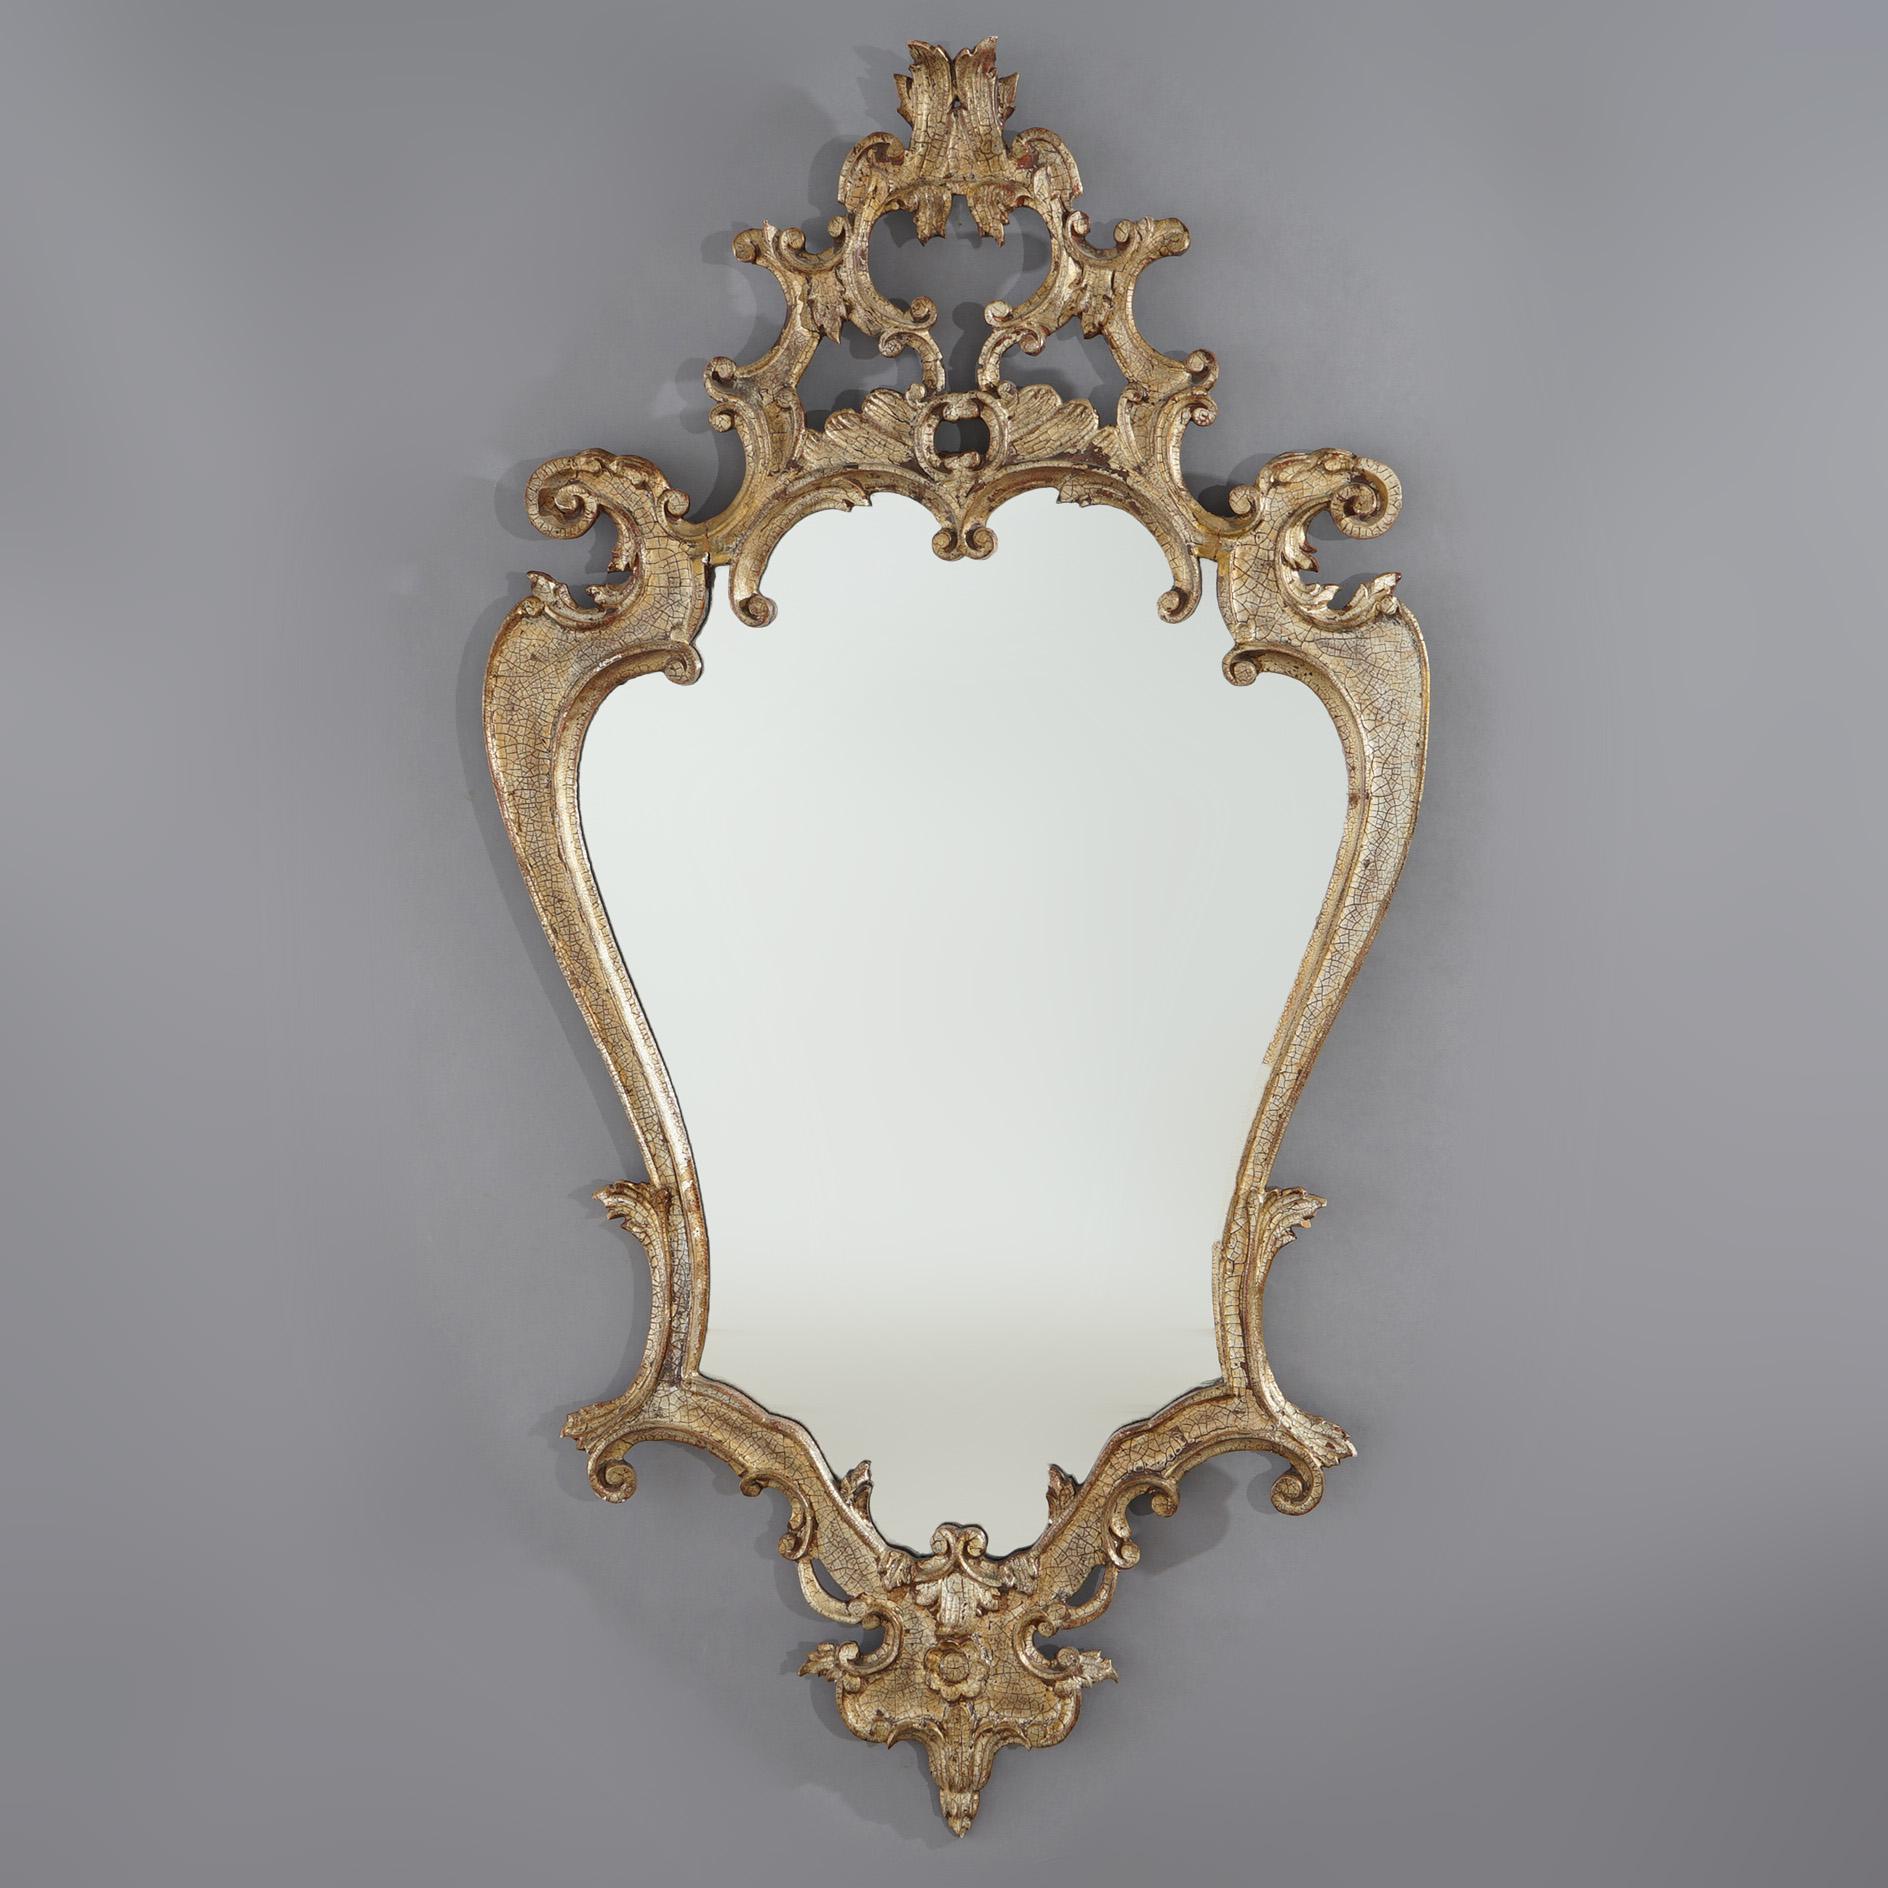 Antique French Louis XIV Giltwood Scroll & Foliate Form Shaped Wall Mirror, C1920

Measures- 48''H x 24.5''W x 2.25''D; 24''W x 34.5'' sight 